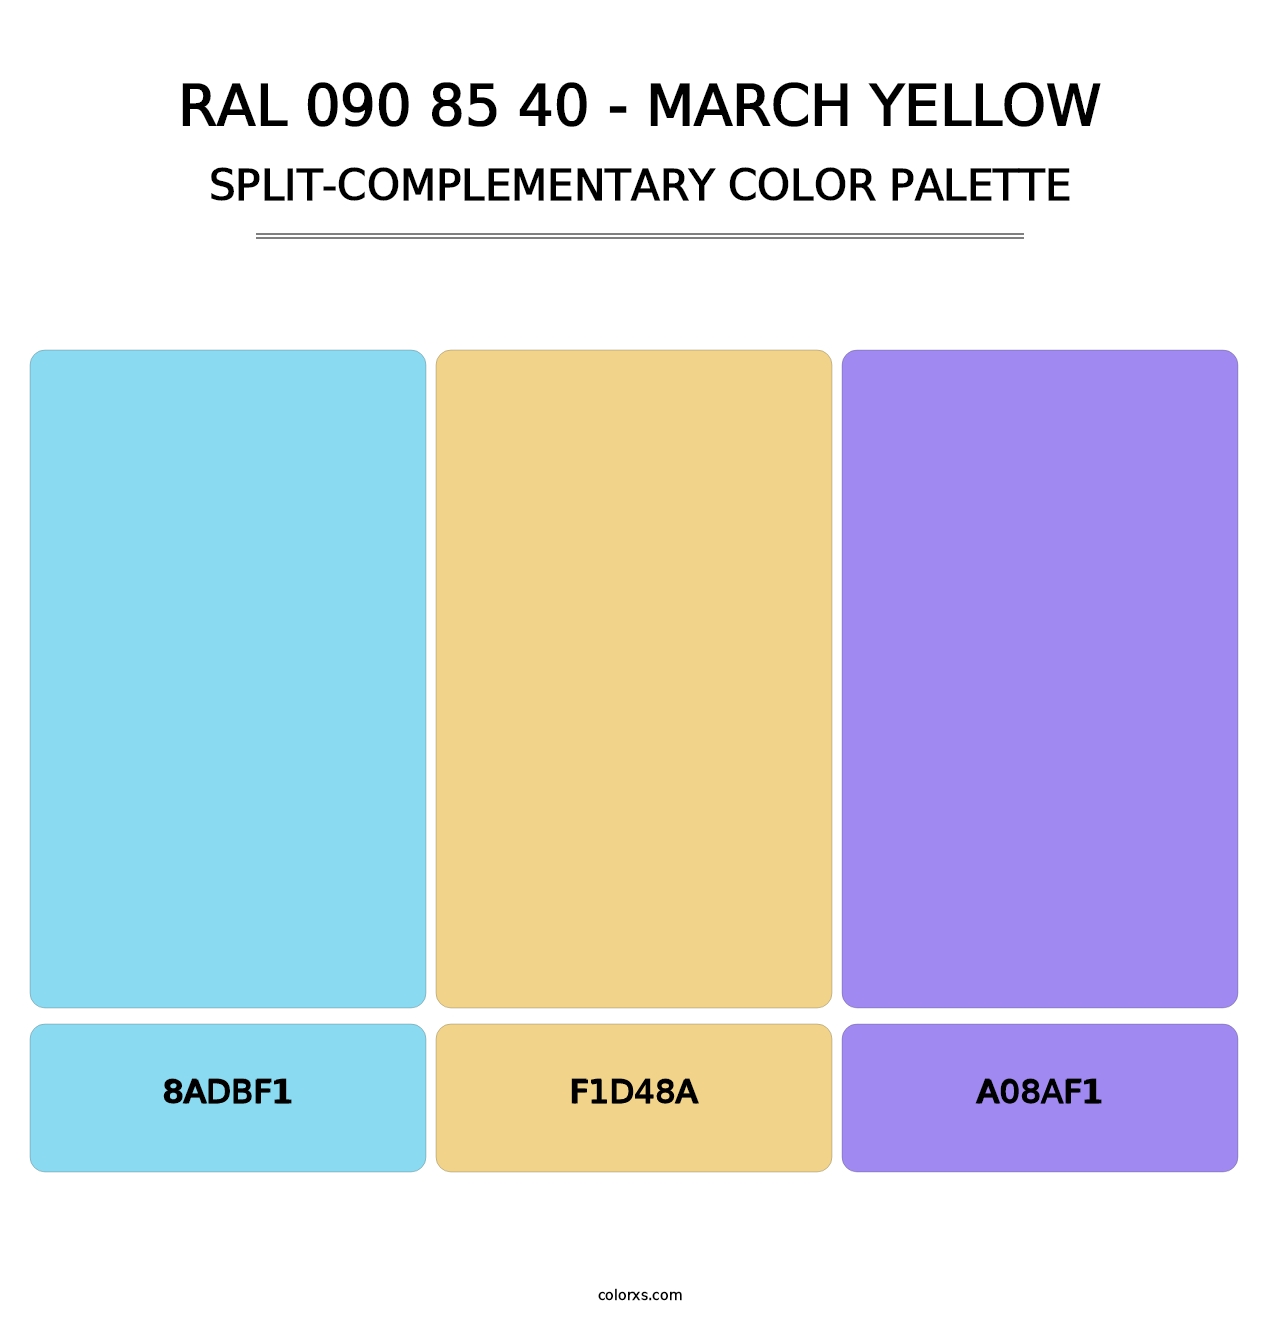 RAL 090 85 40 - March Yellow - Split-Complementary Color Palette